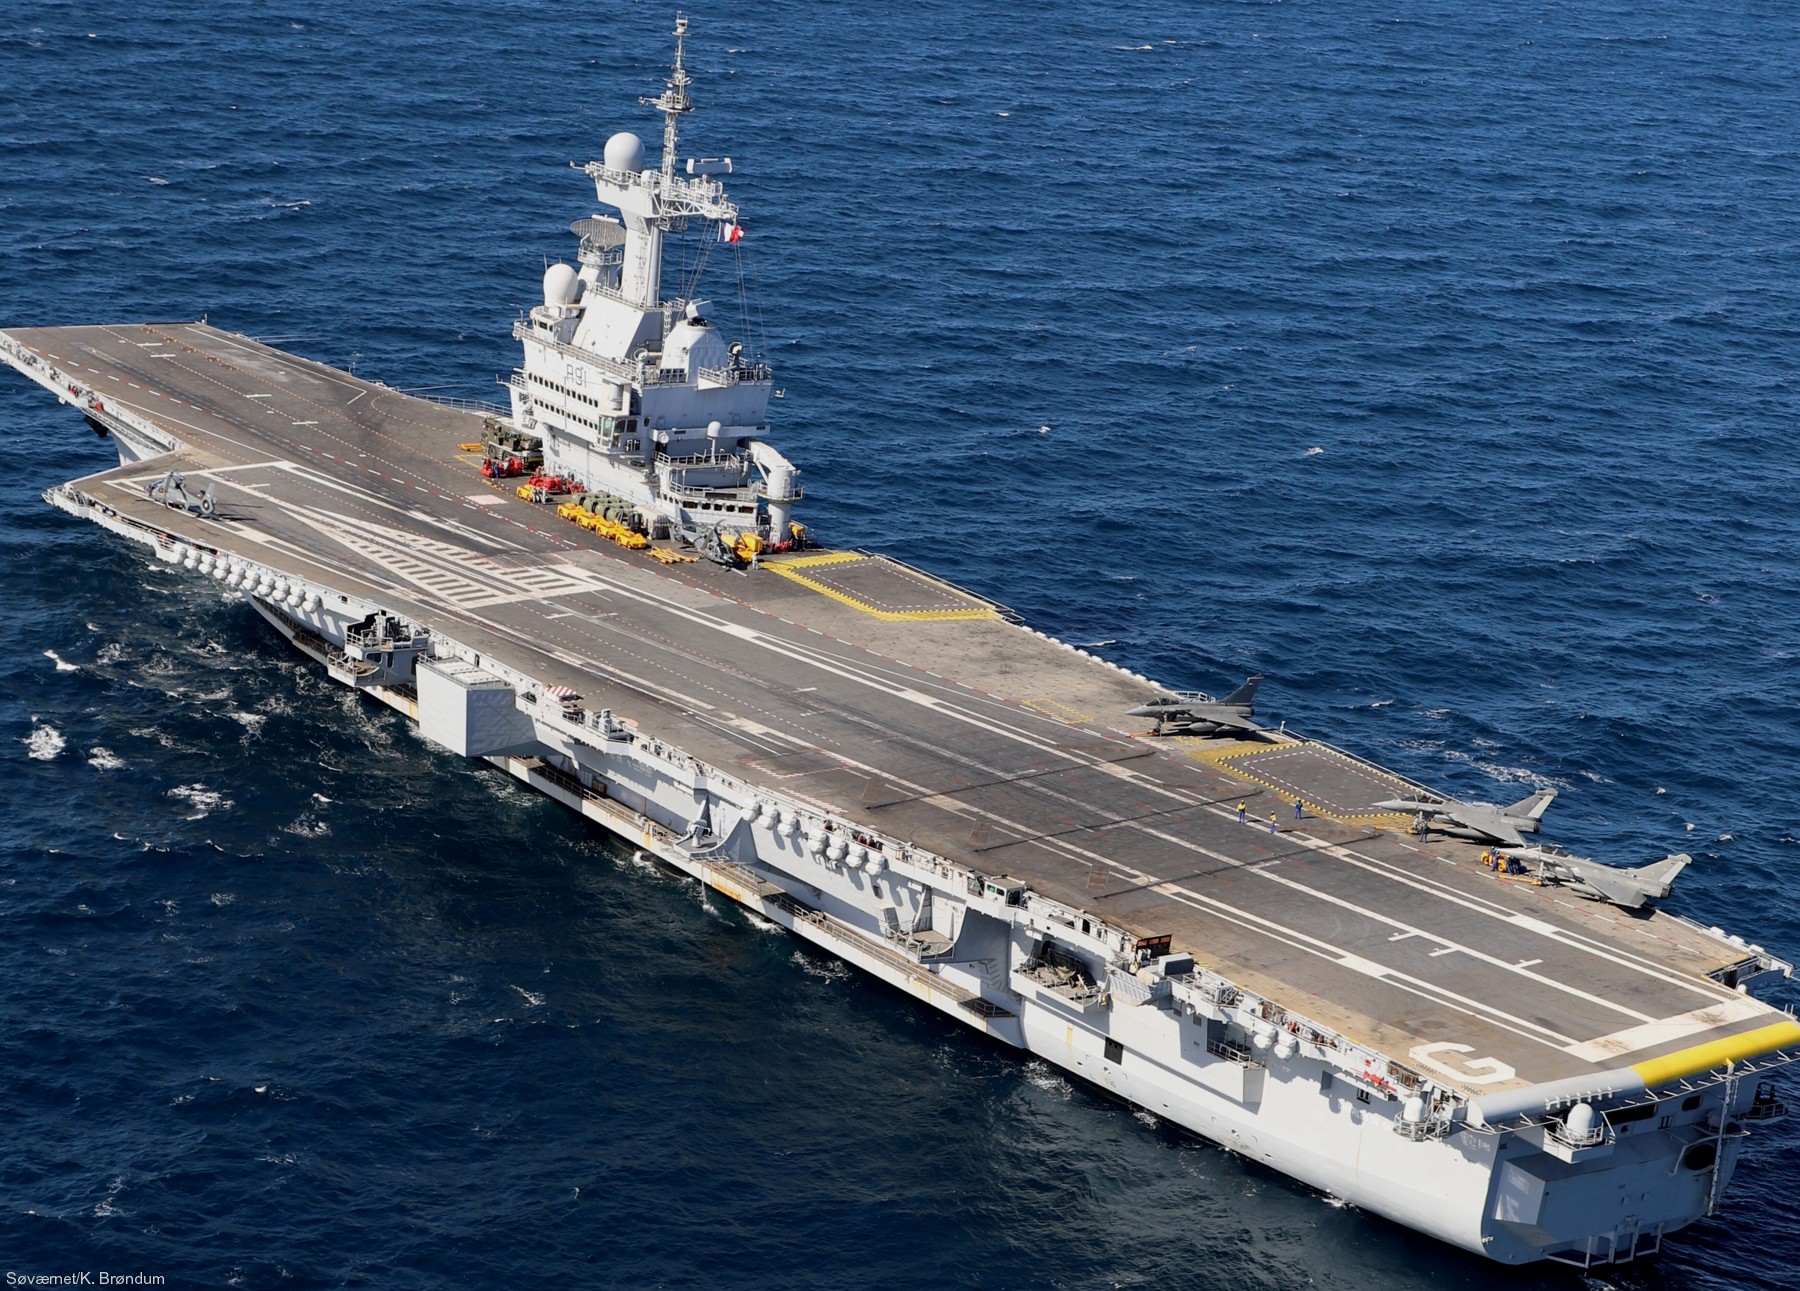 r-91 fs charles de gaulle aircraft carrier french navy porte avions 90